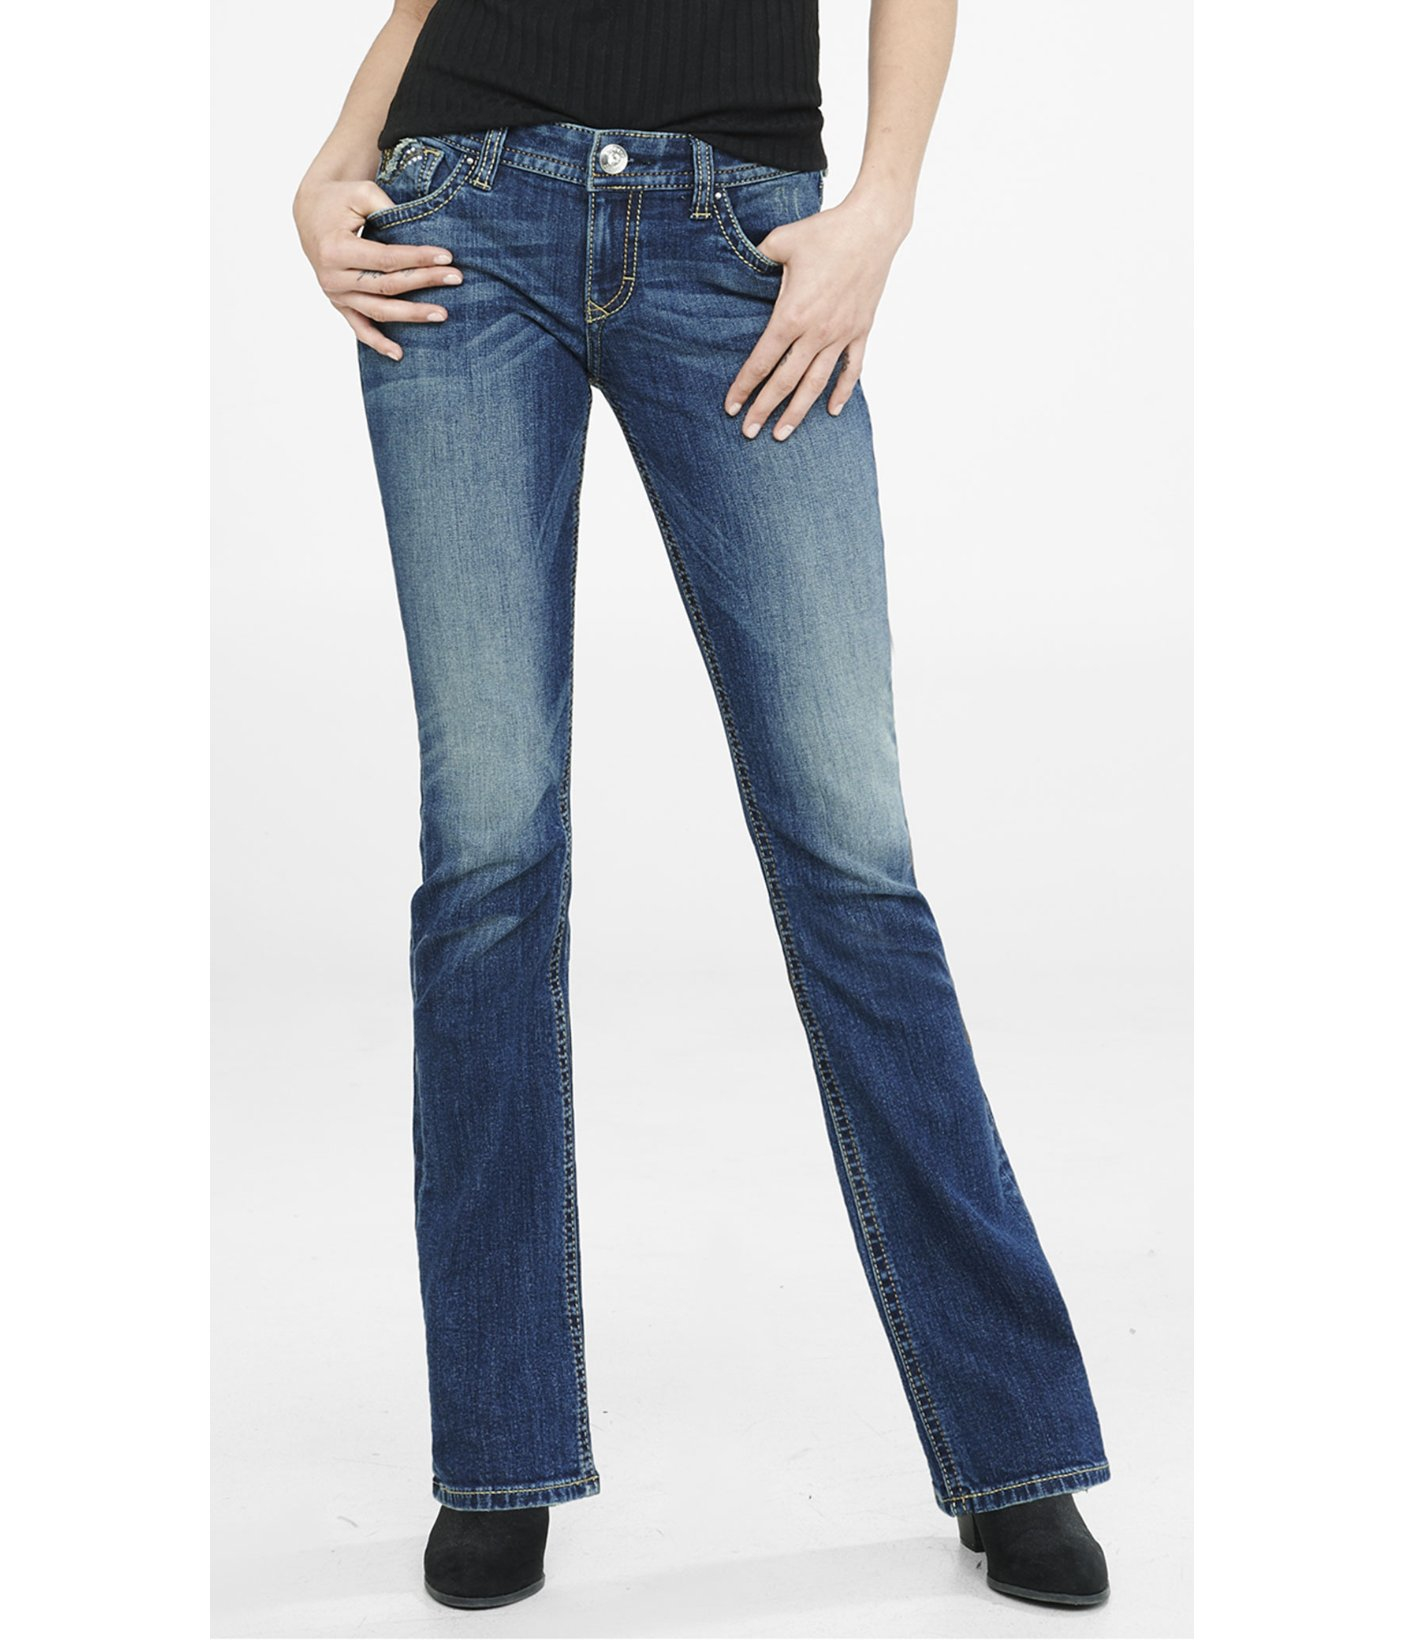 Low Rise Barely Boot Jean in Dark 